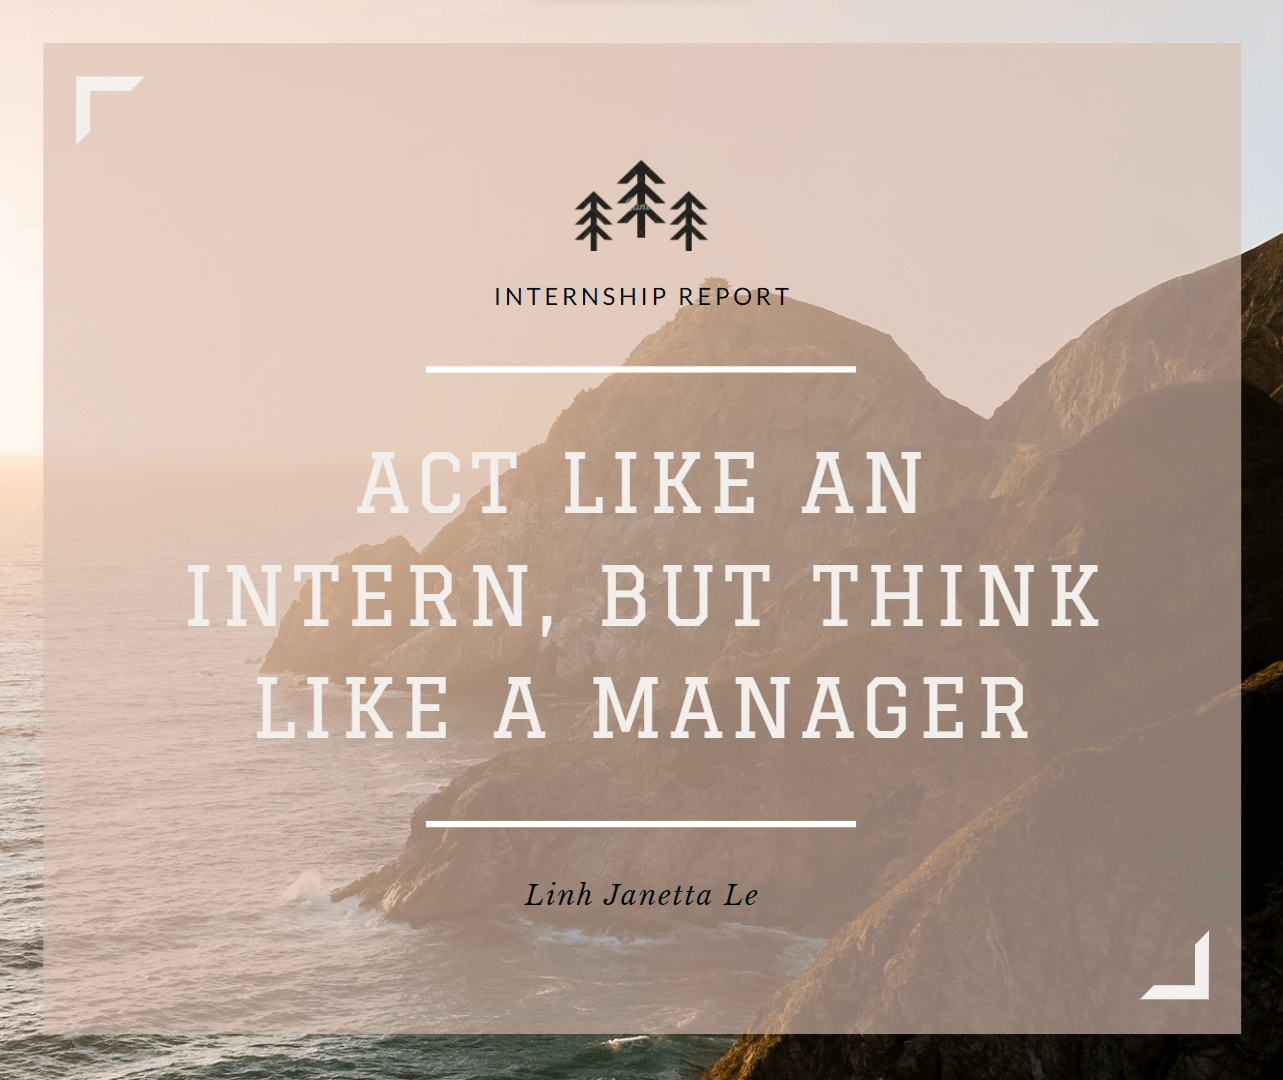 ♡ Internship Report Sample – “Act Like An Intern But Think Like A Manager” ♡